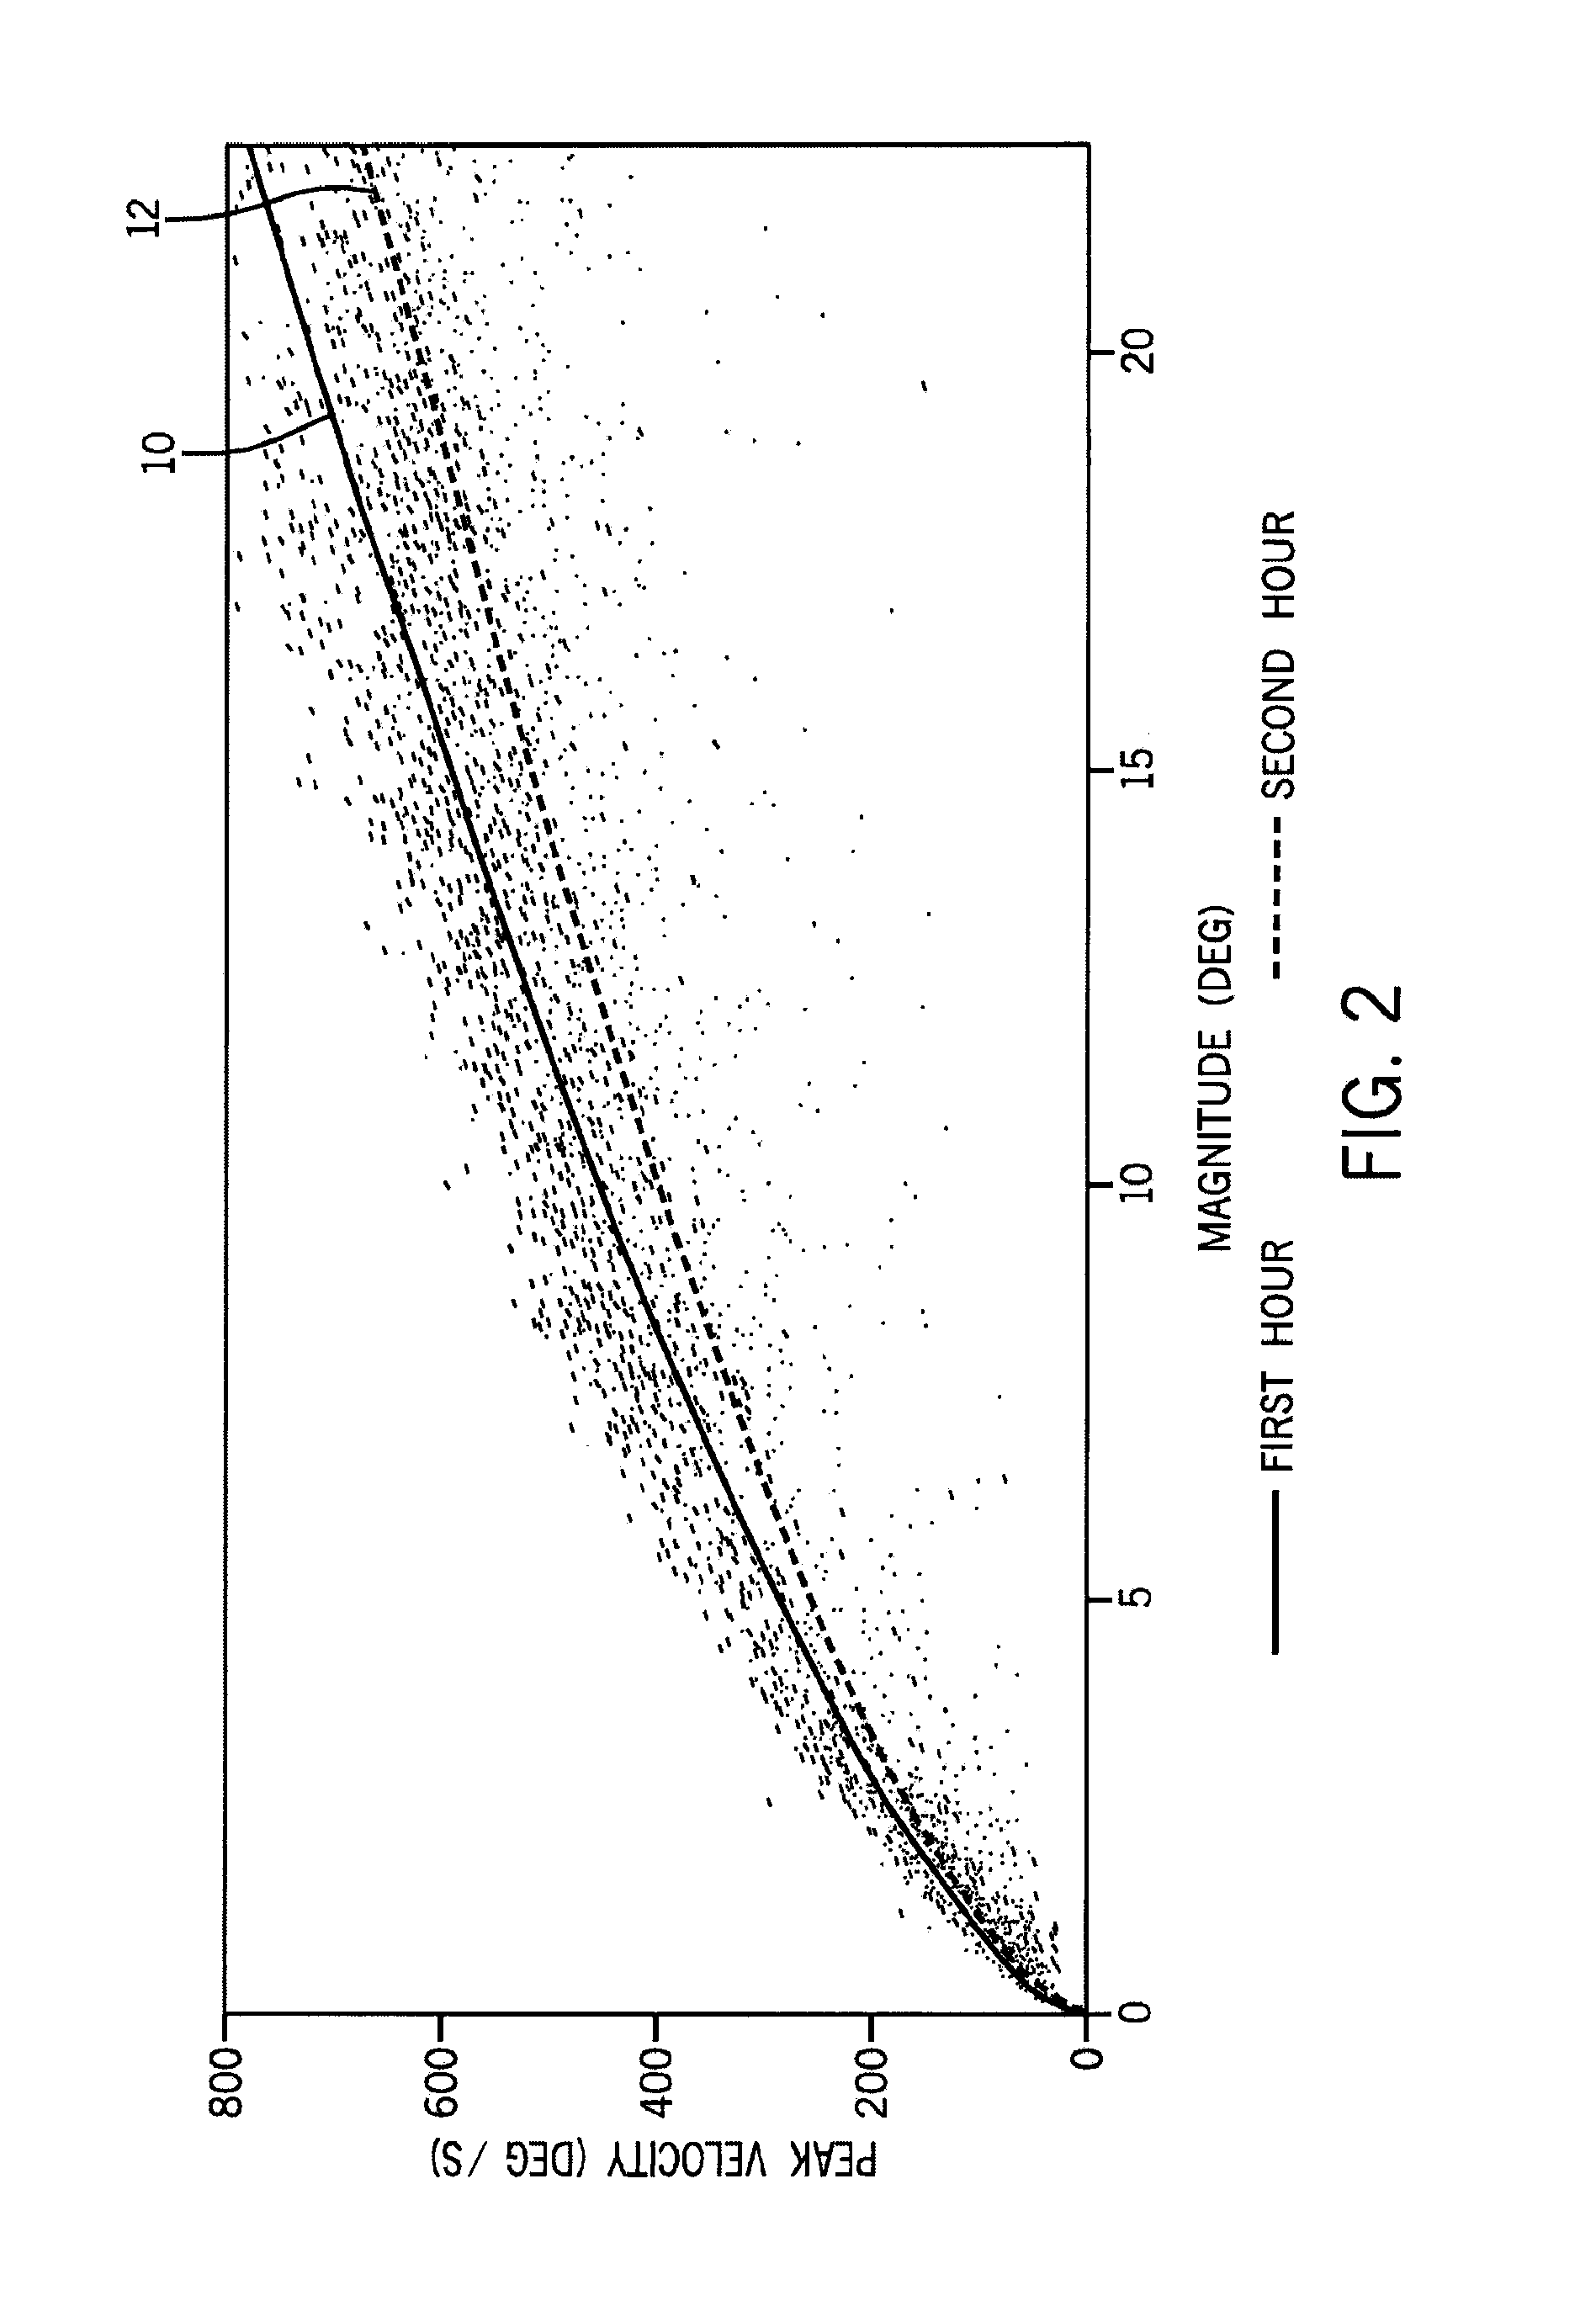 System and method for using microsaccade peak velocity as a measure of mental workload and fatigue